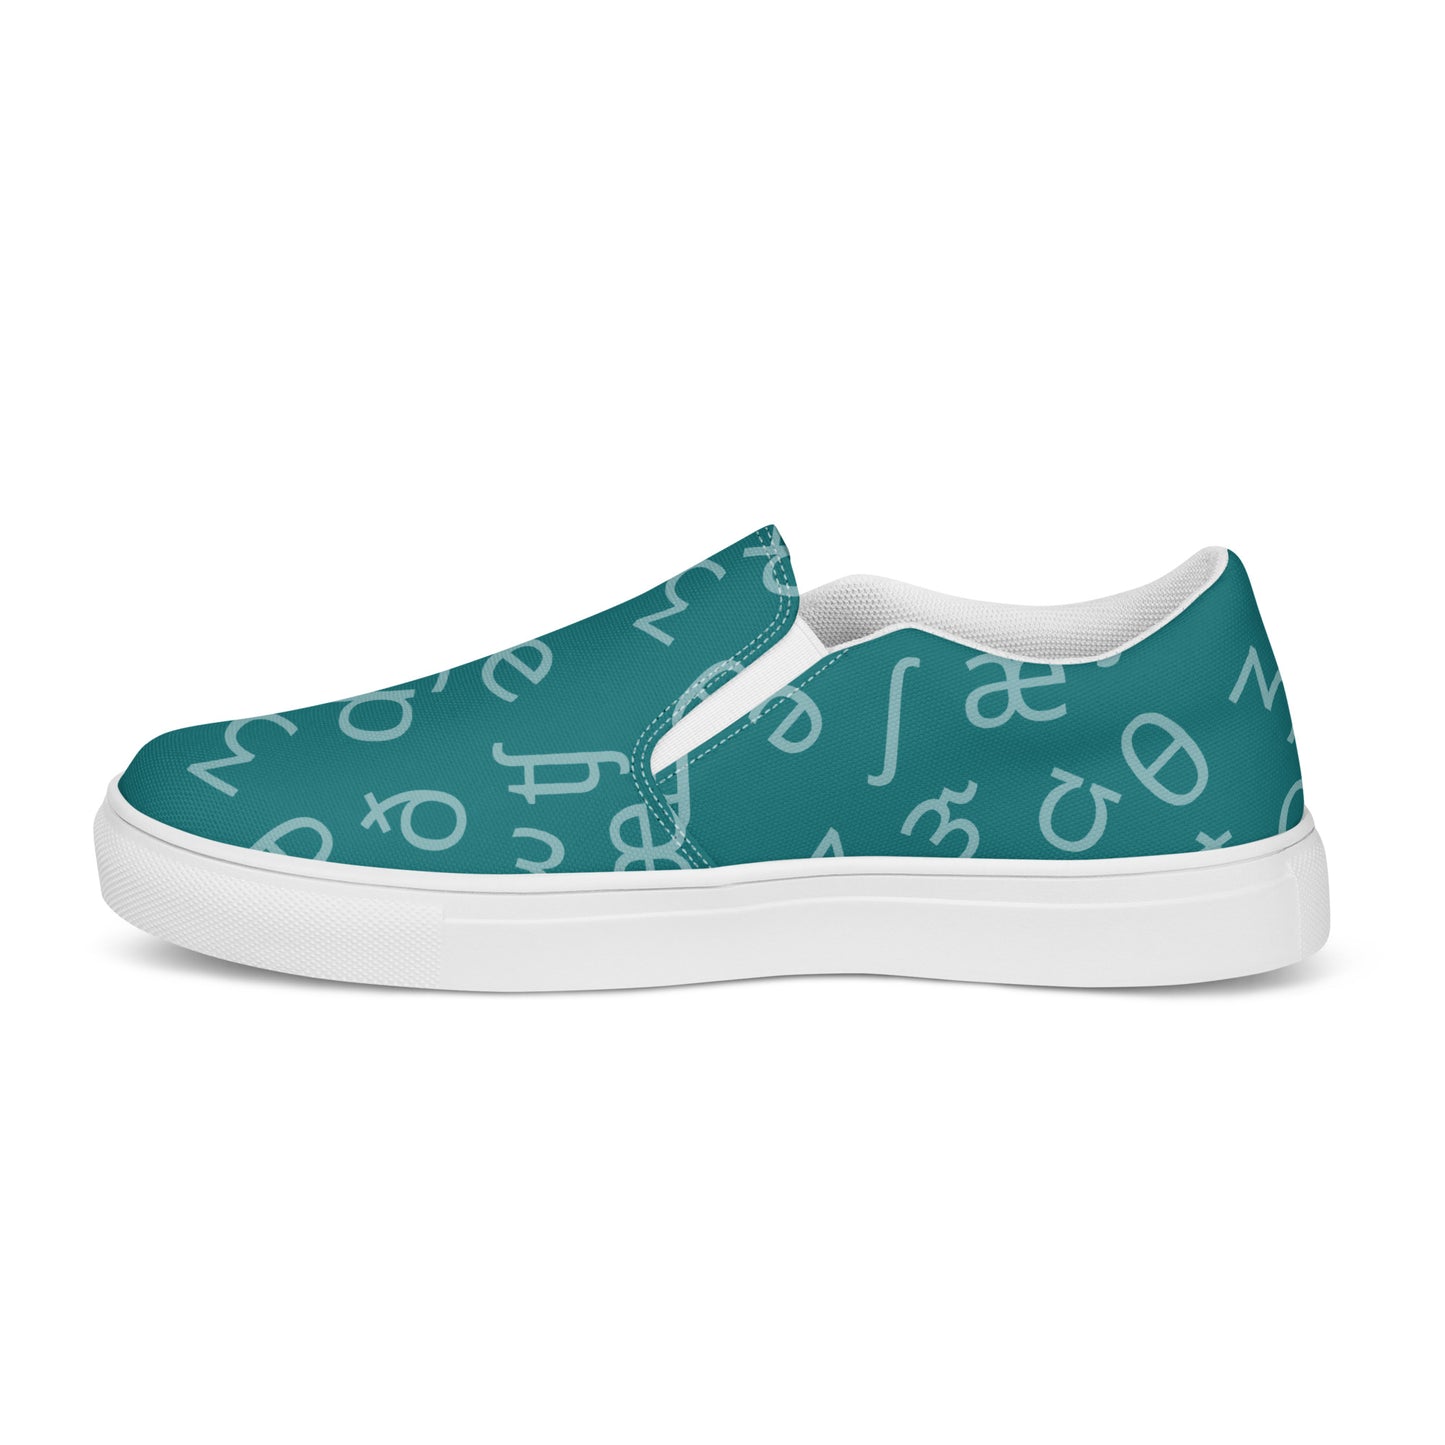 Teal IPA Slip-on Canvas Shoes (Women's Sizes)